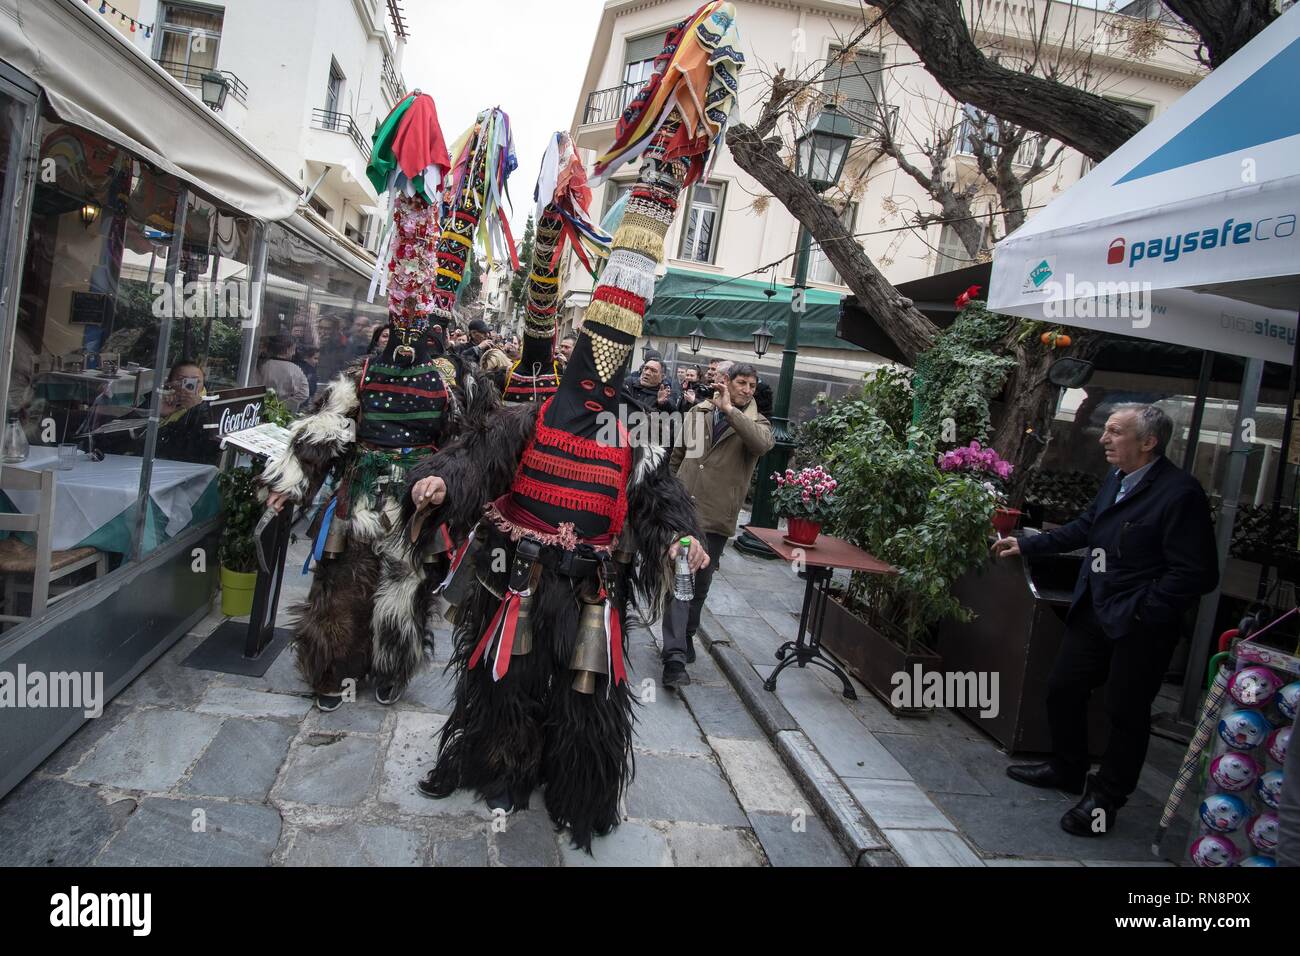 Participants seen wearing masks and dancing during the custom. Bell Wearers present their customs with dances and music in Athens, Greece. A custom from Serres where the participants wear bells and big masks with colors. Stock Photo